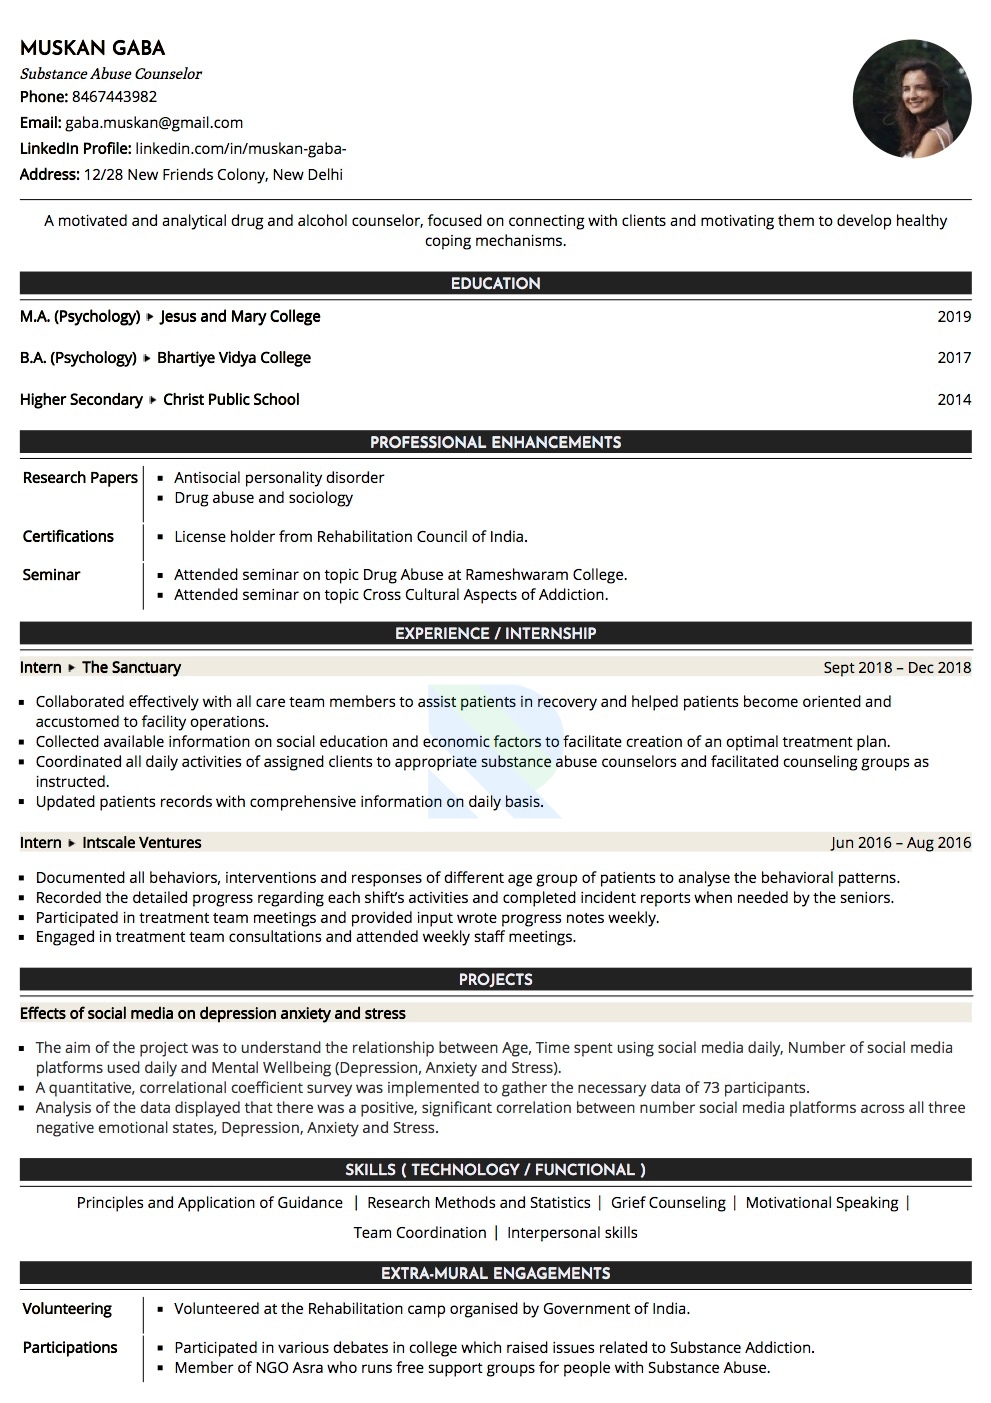 Resume of Substance Abuse Counselor